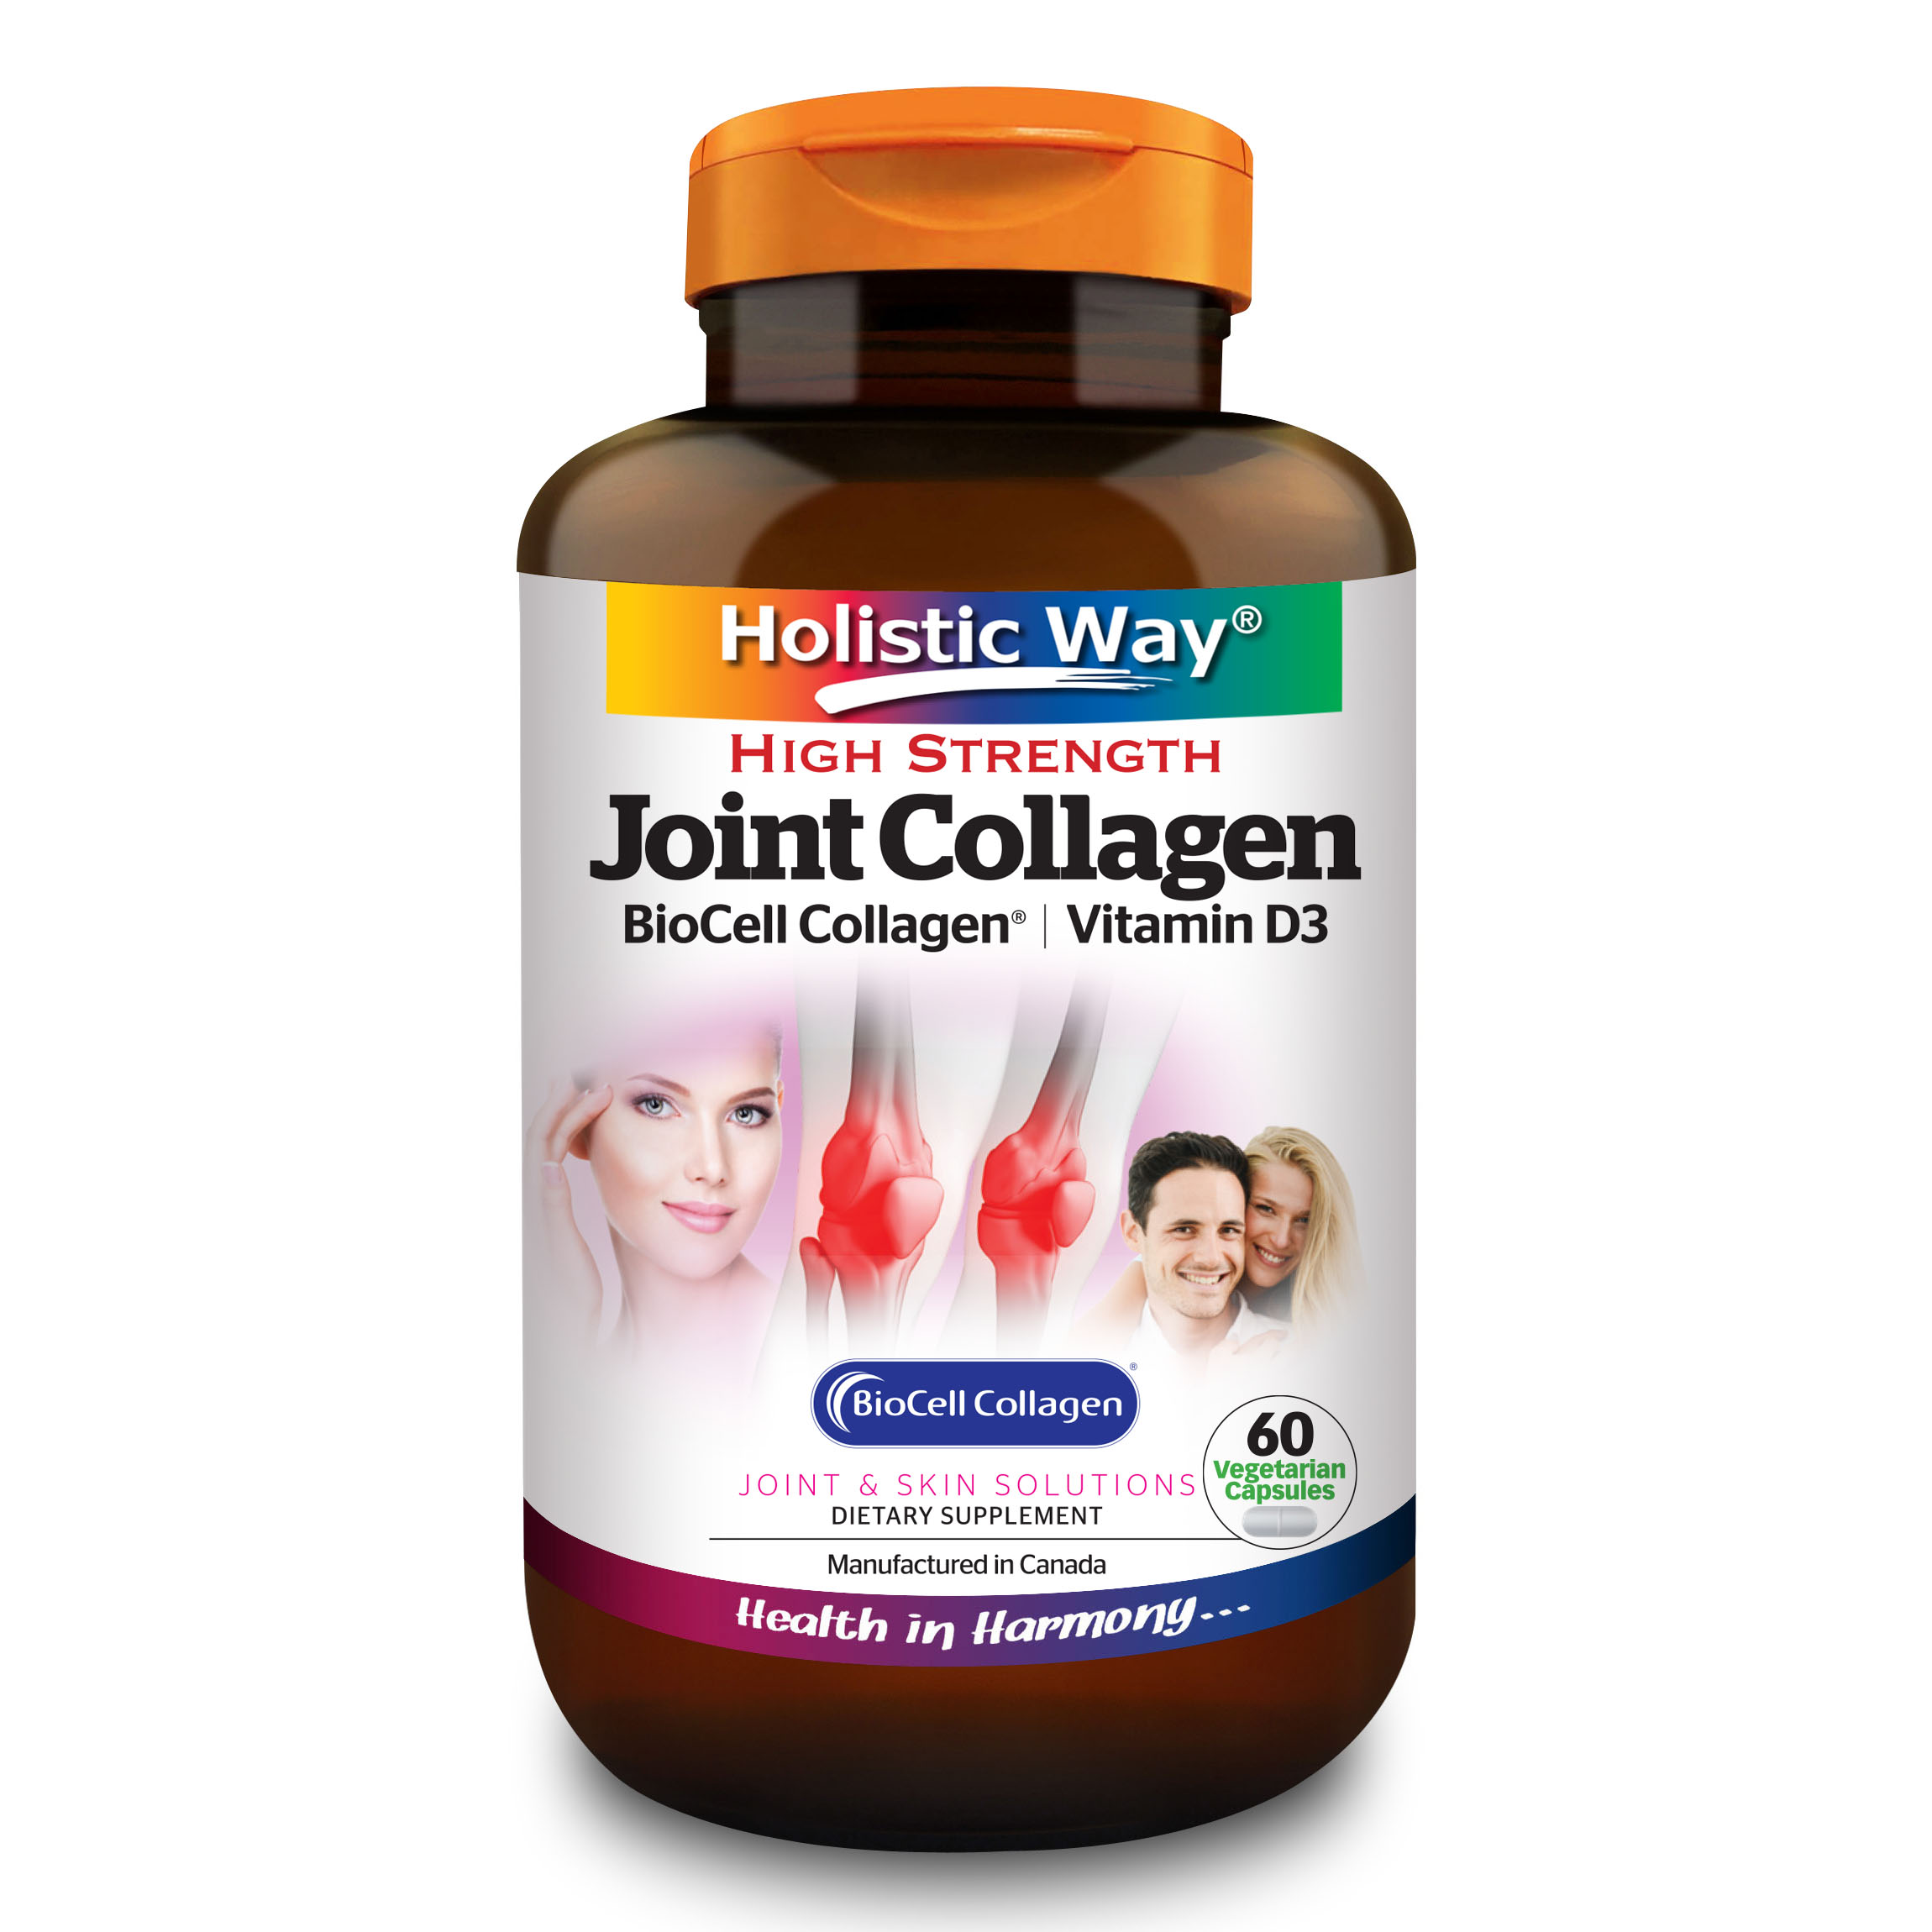 Holistic Way High Strength Joint Collagen with BioCell Collagen® and Vitamin D3 (60 Veg. Caps)